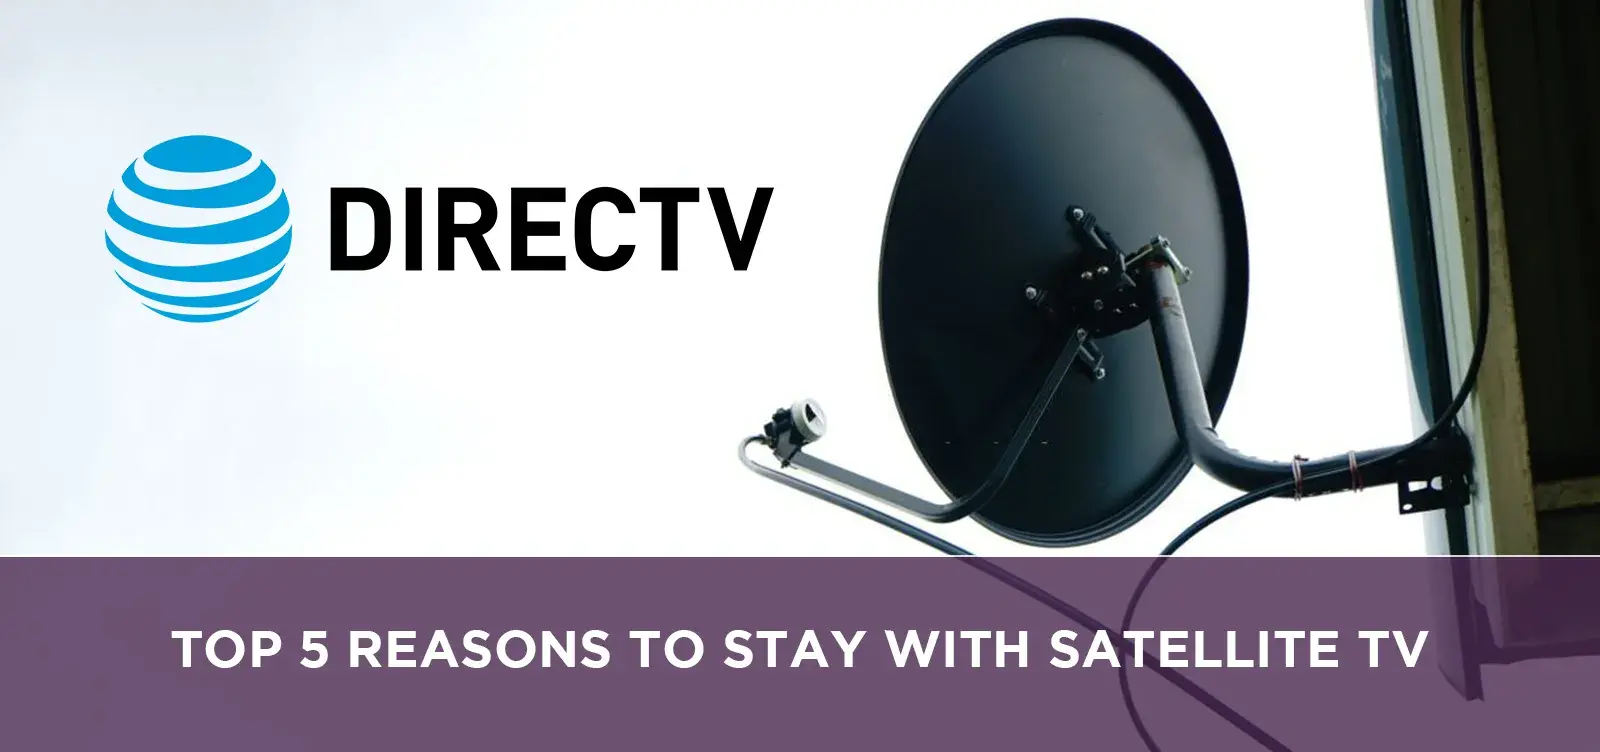 Top 5 Reasons to stay with satellite TV